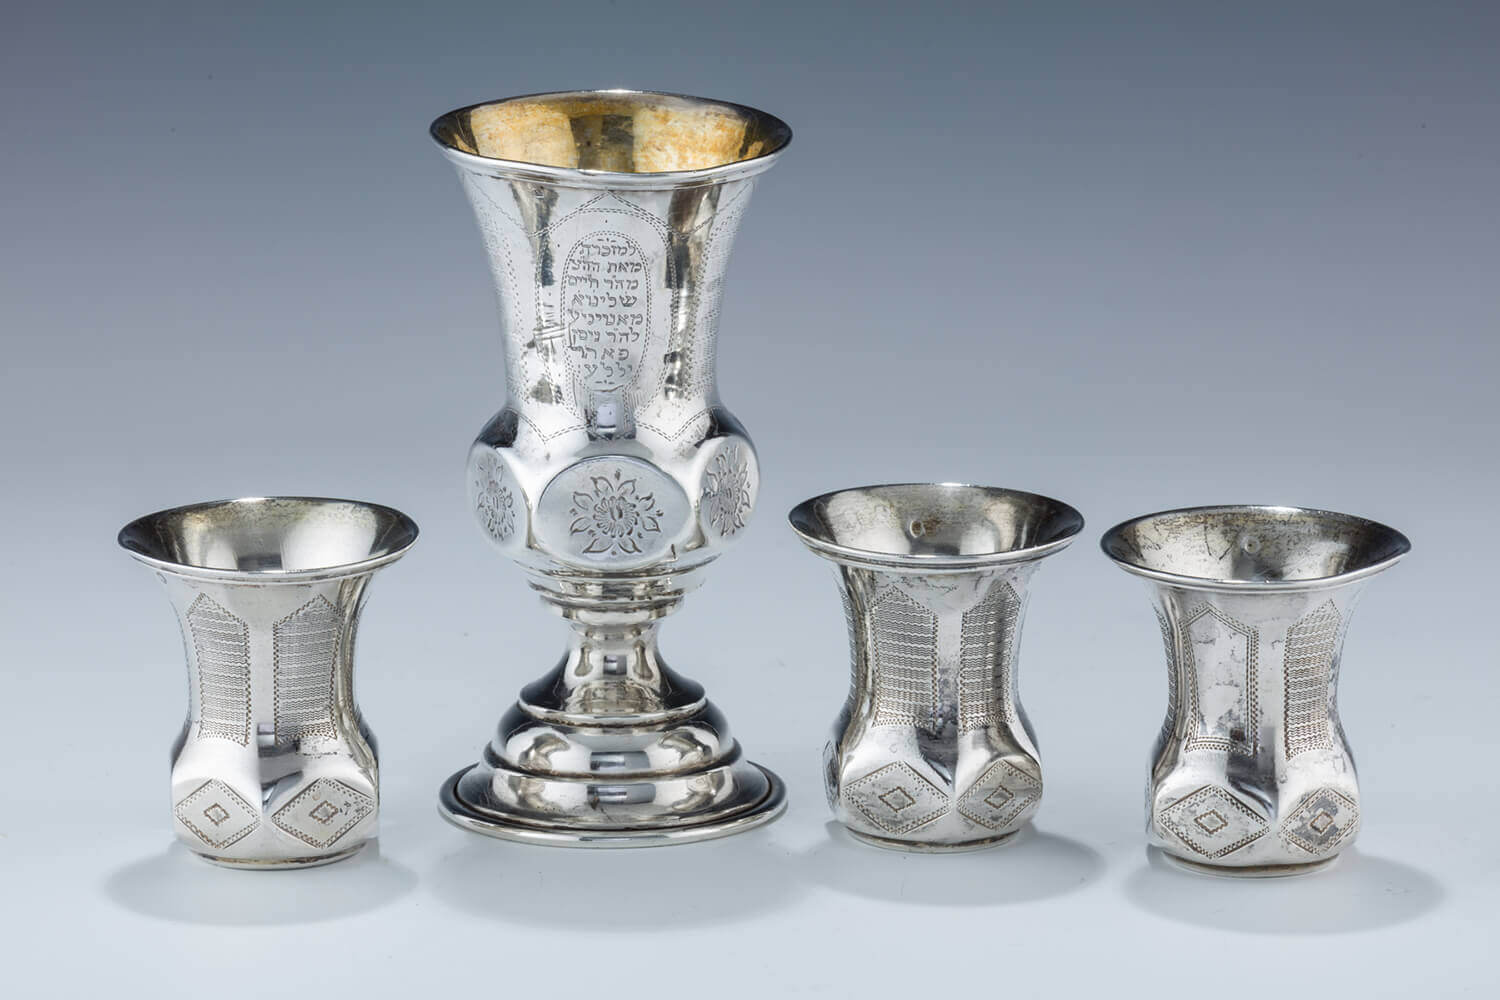 064. A SILVER KIDDUSH GOBLET WITH THREE MATCHING CUPS